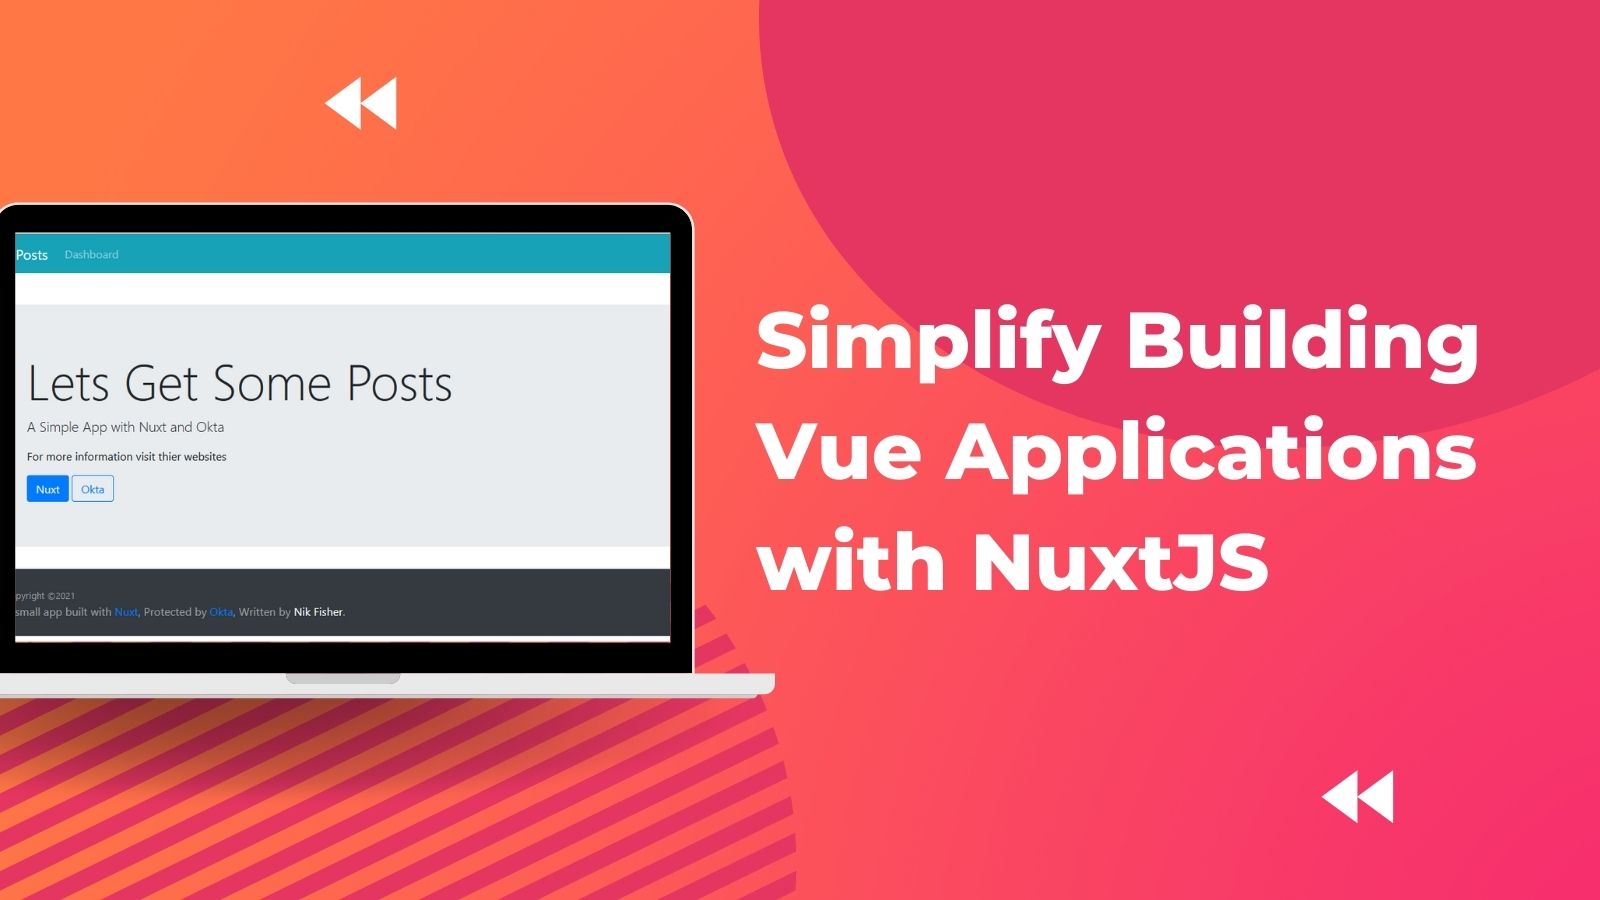 Simplify Building Vue Applications with NuxtJS